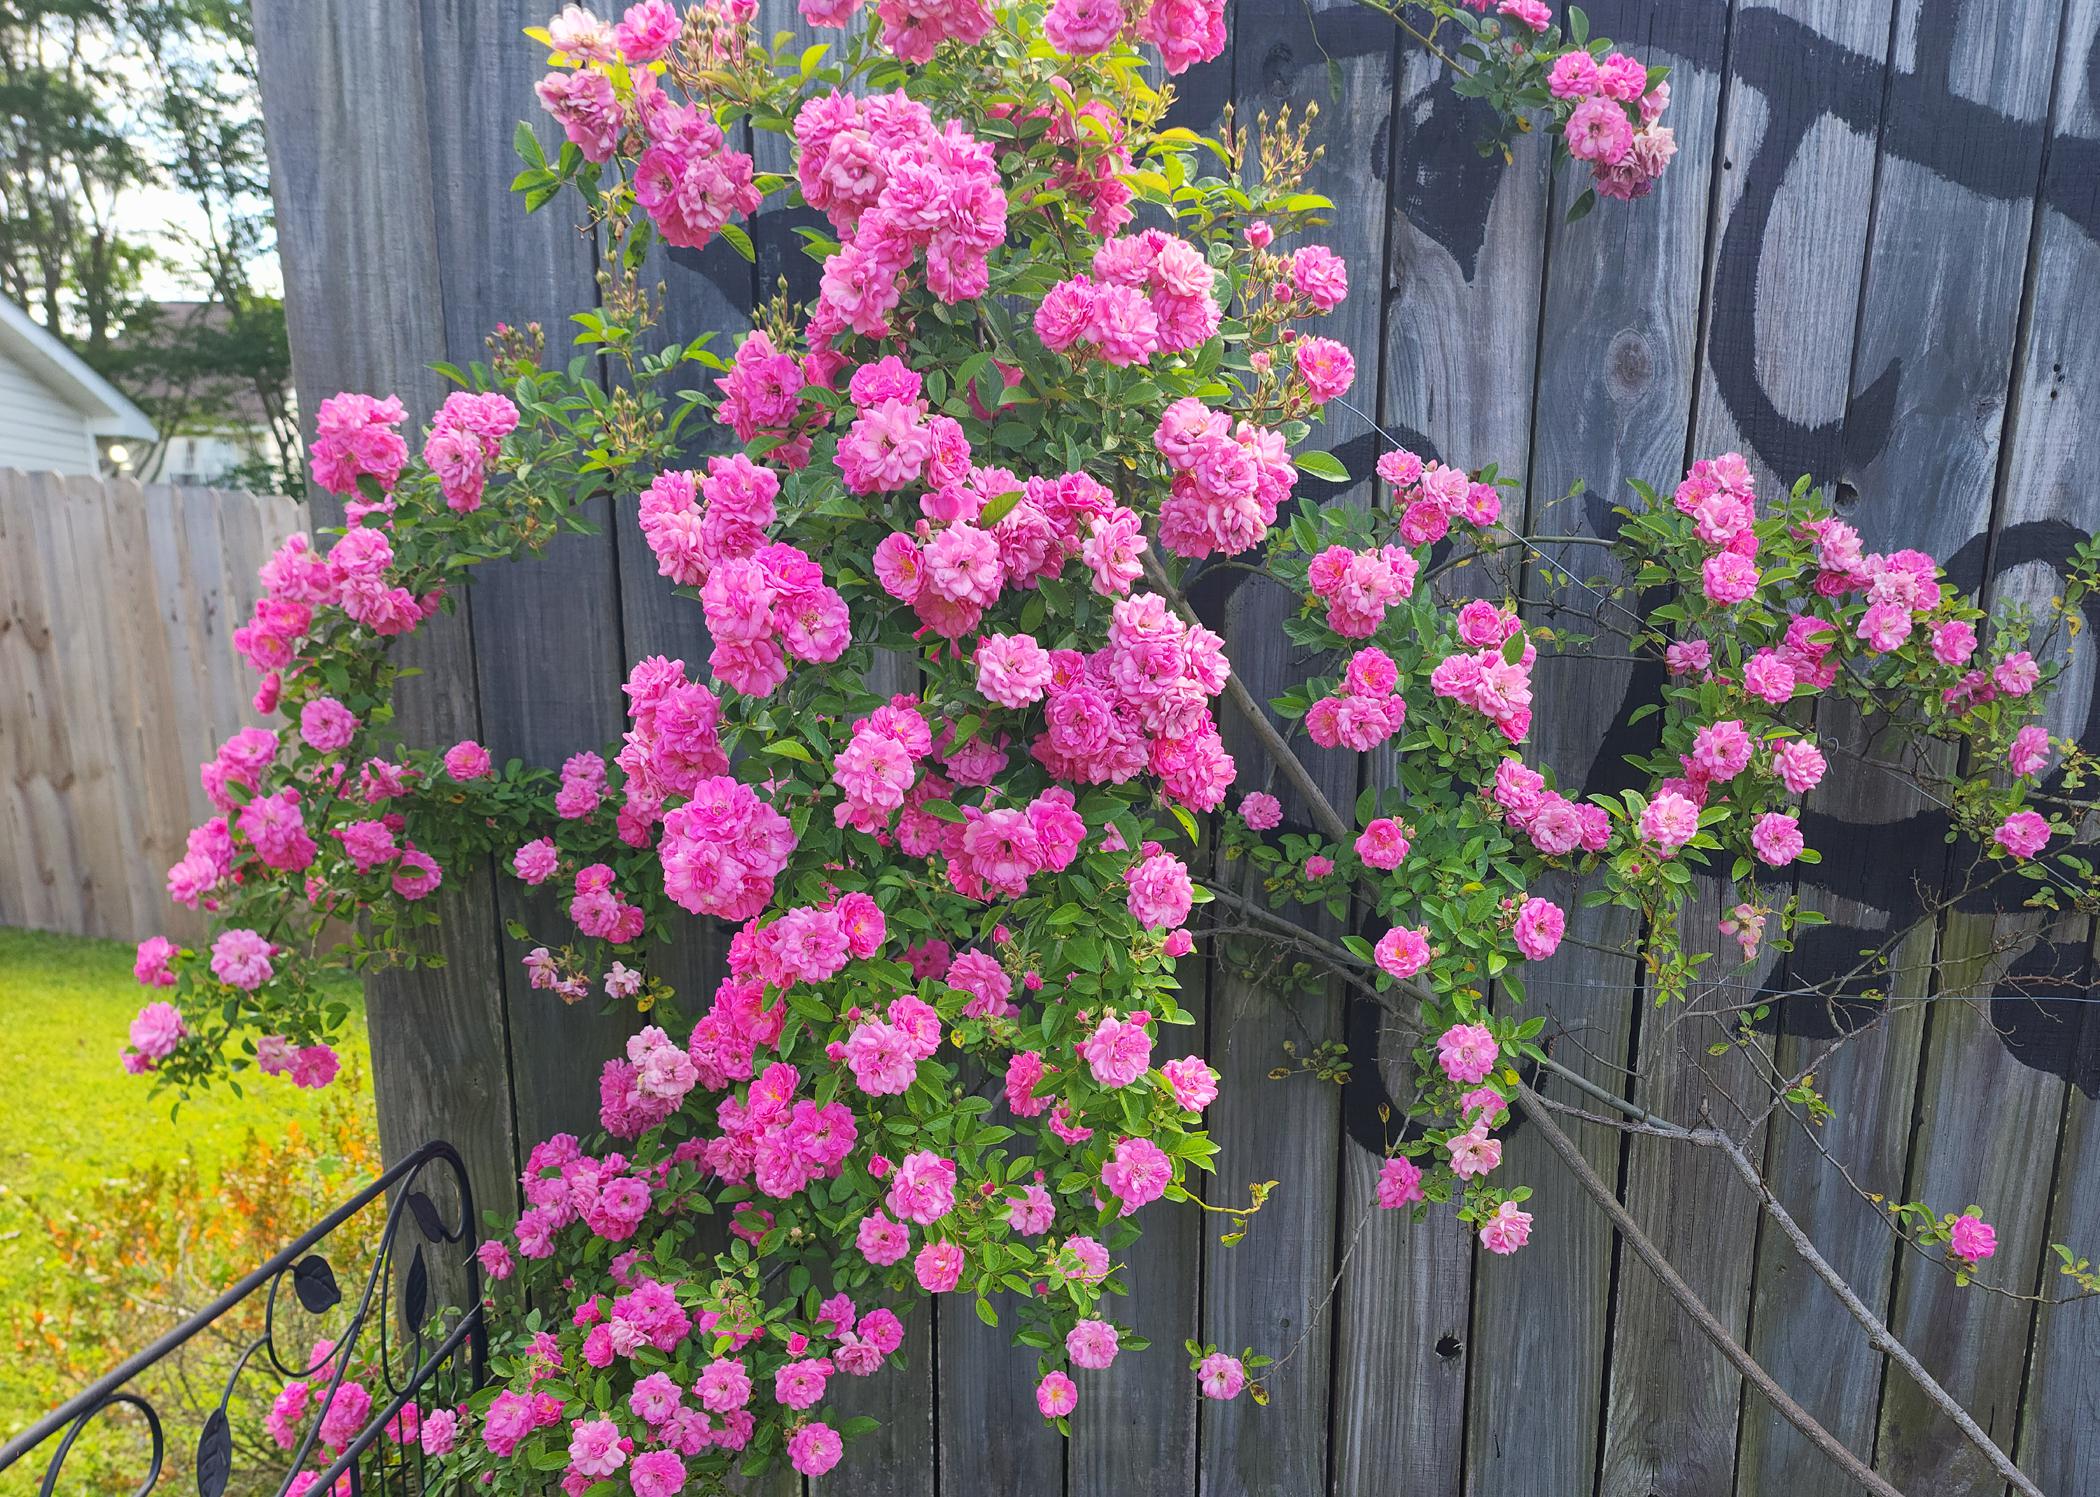 A cluster of pink blooms leaning against a wooden fence.